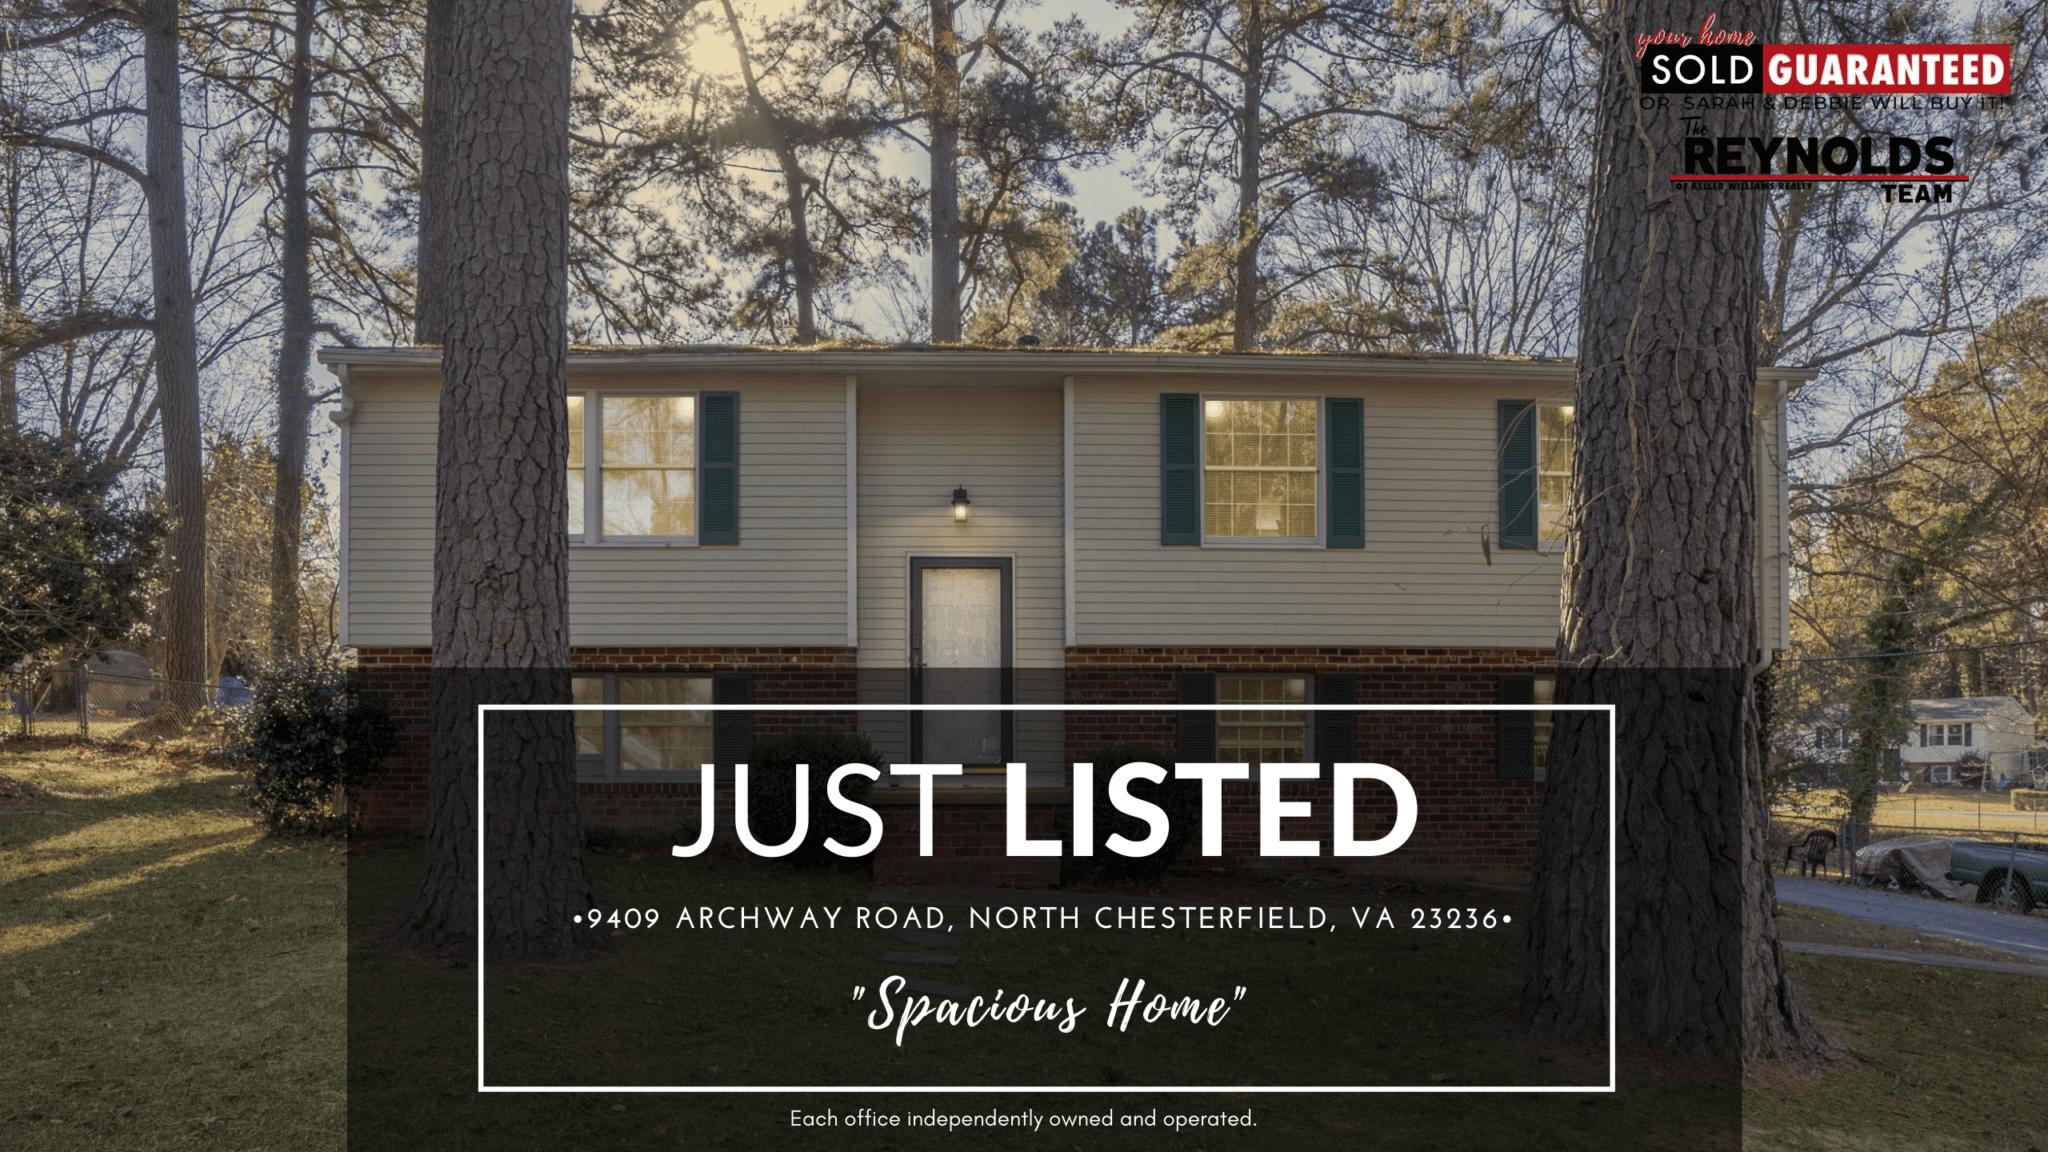 9409 Archway Road, North Chesterfield, VA 23236